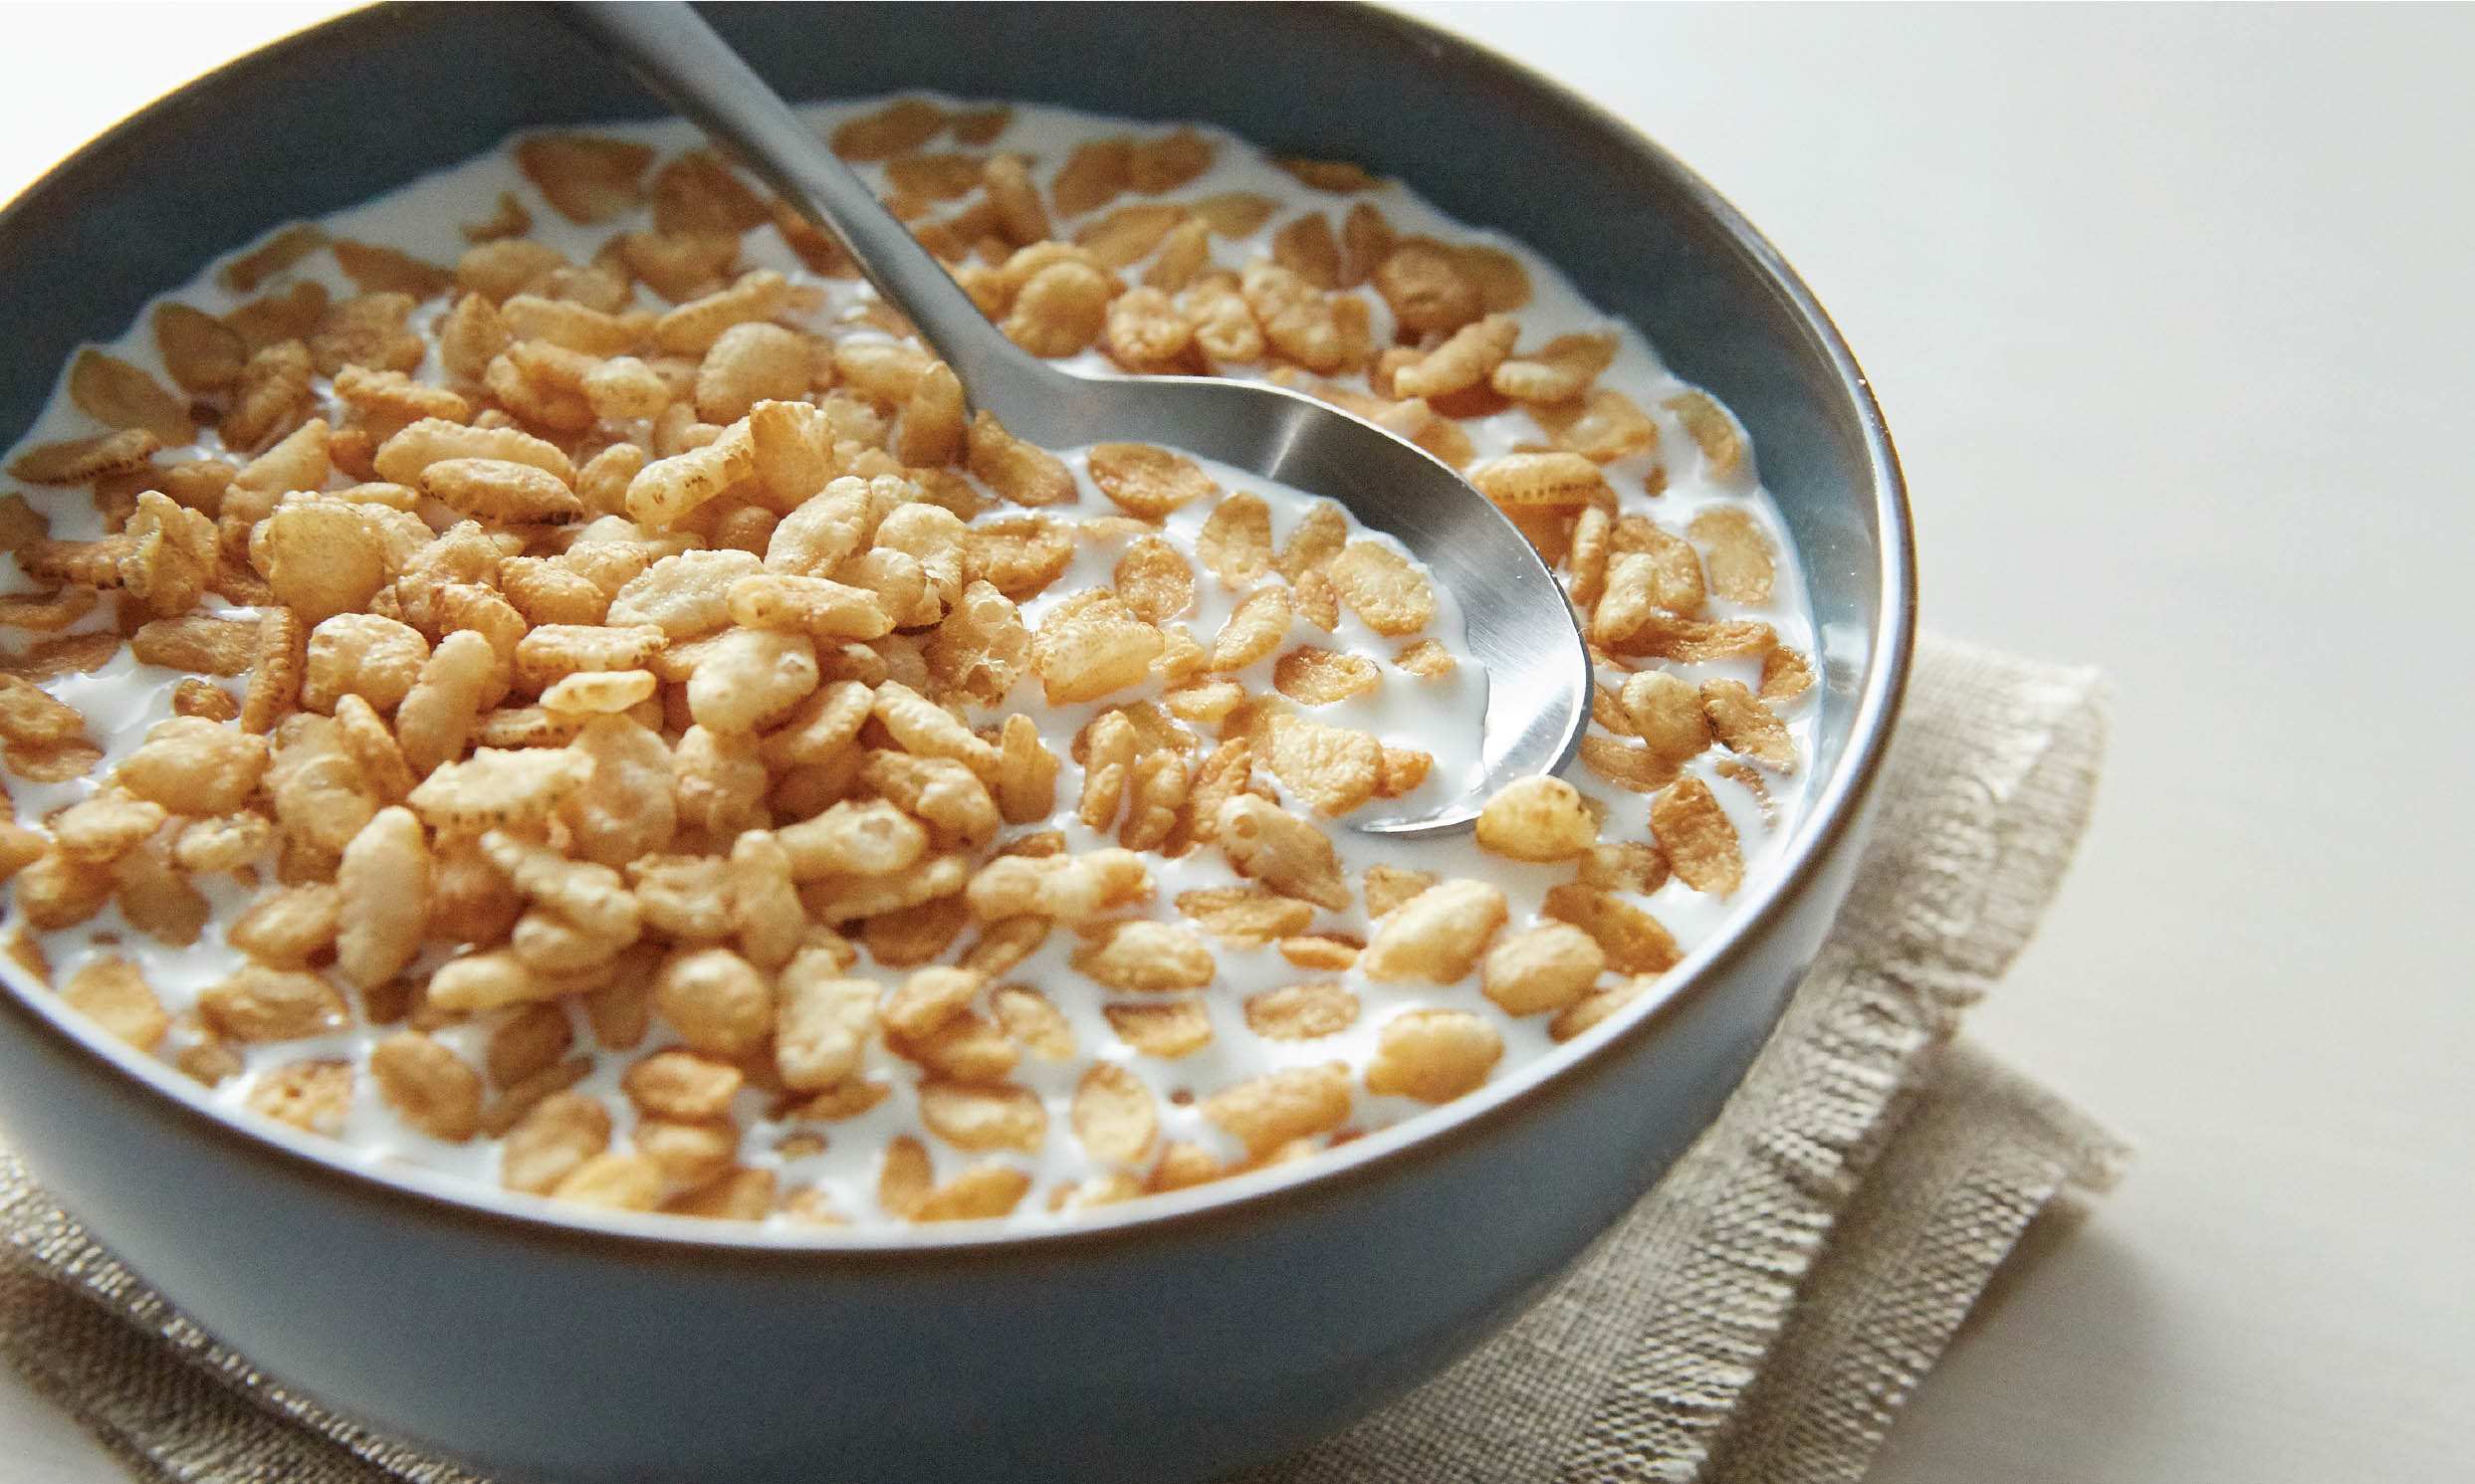 11-rice-cereal-nutrition-facts